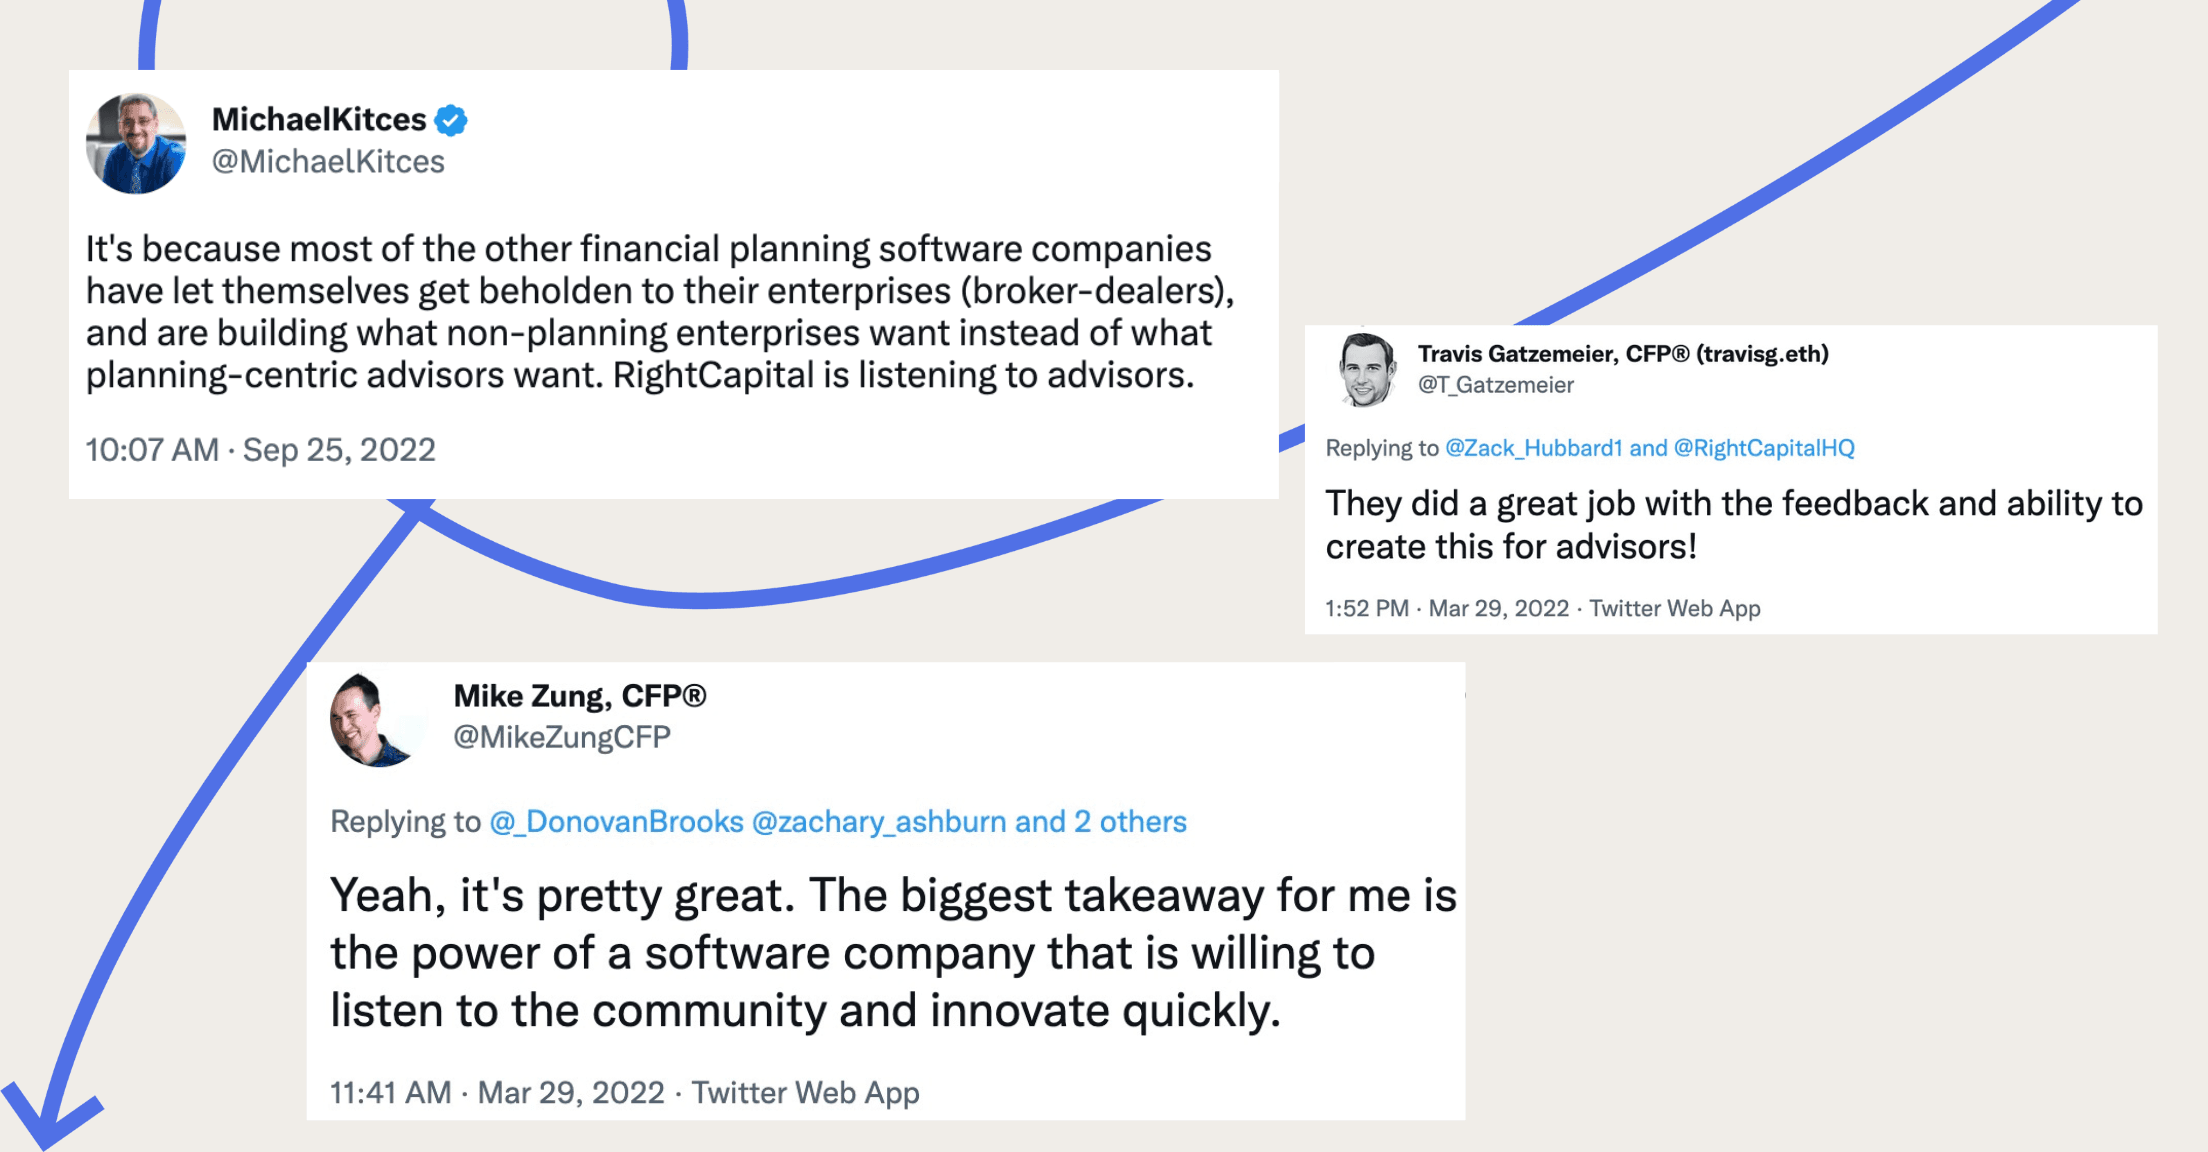 Tweets about how much RightCapital listens to advisors to make things happen